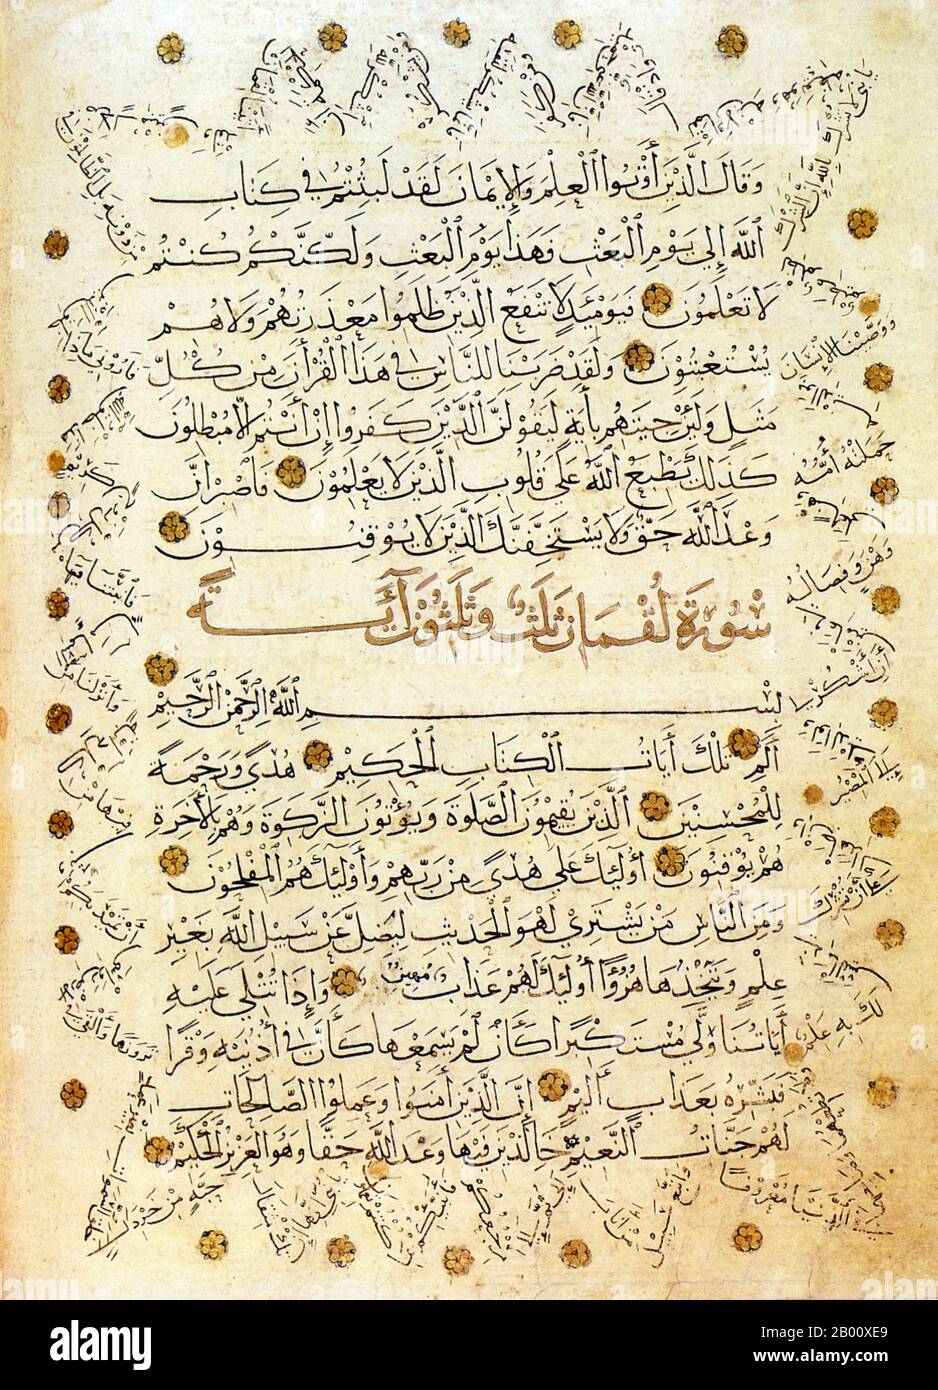 Iraq: A page from an illuminated Qur’an handwritten on paper manufactured in Venice in the mid-14th century.  The zigzagged text in the margins is a continuation of the manuscript written to economize on the use of expensive imported paper.  The Qur’an (literally 'the recitation') is the main religious text of Islam. Muslims believe the Qur’an to be the verbal divine guidance and moral direction for mankind. Muslims also consider the original Arabic verbal text to be the final revelation of God. Muslims believe that the Qur’an was revealed from God to Muhammad through the angel Gabriel. Stock Photo